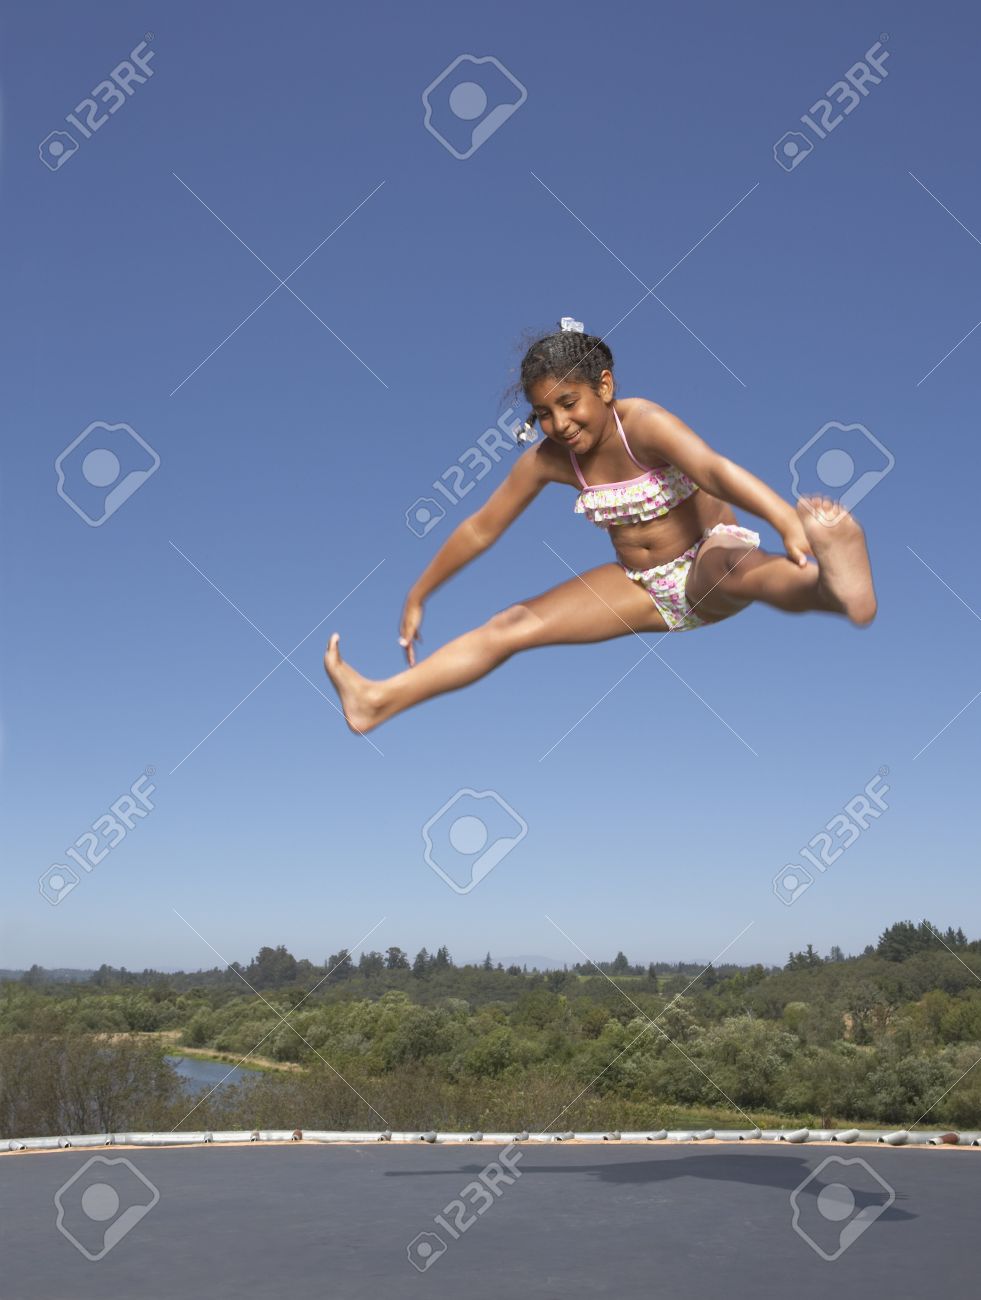 alex picinich recommends Girls Jumping On Trampolines